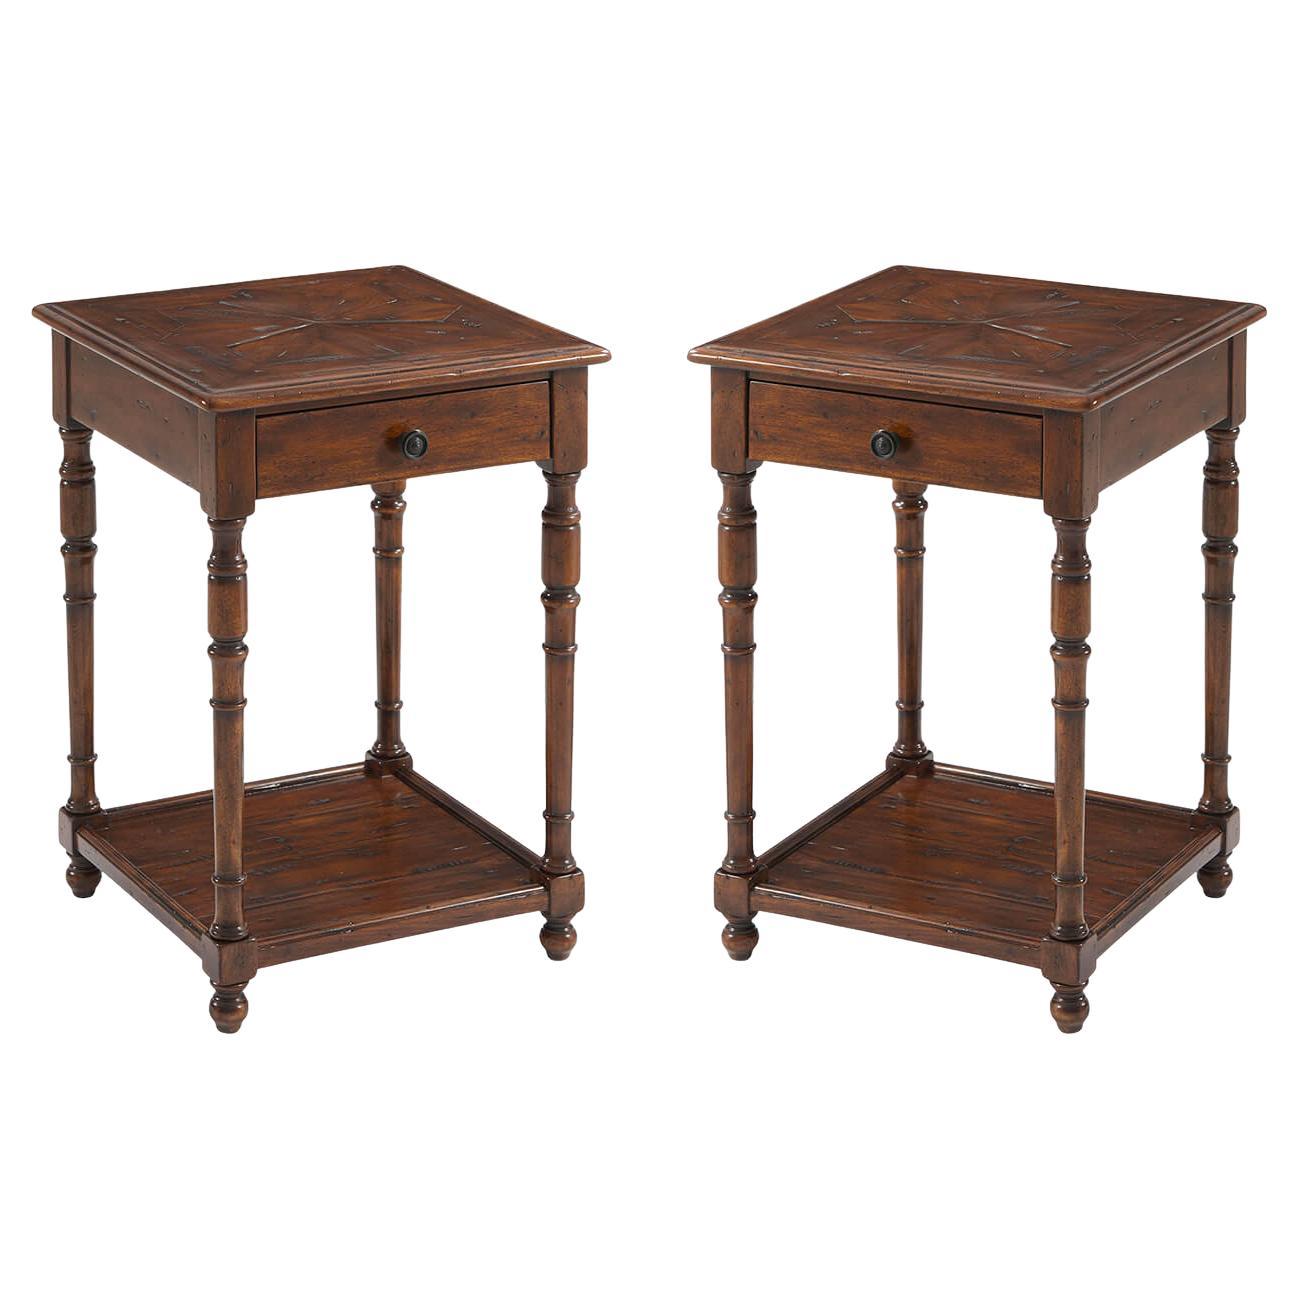 Pair of English Rustic Accent Tables For Sale